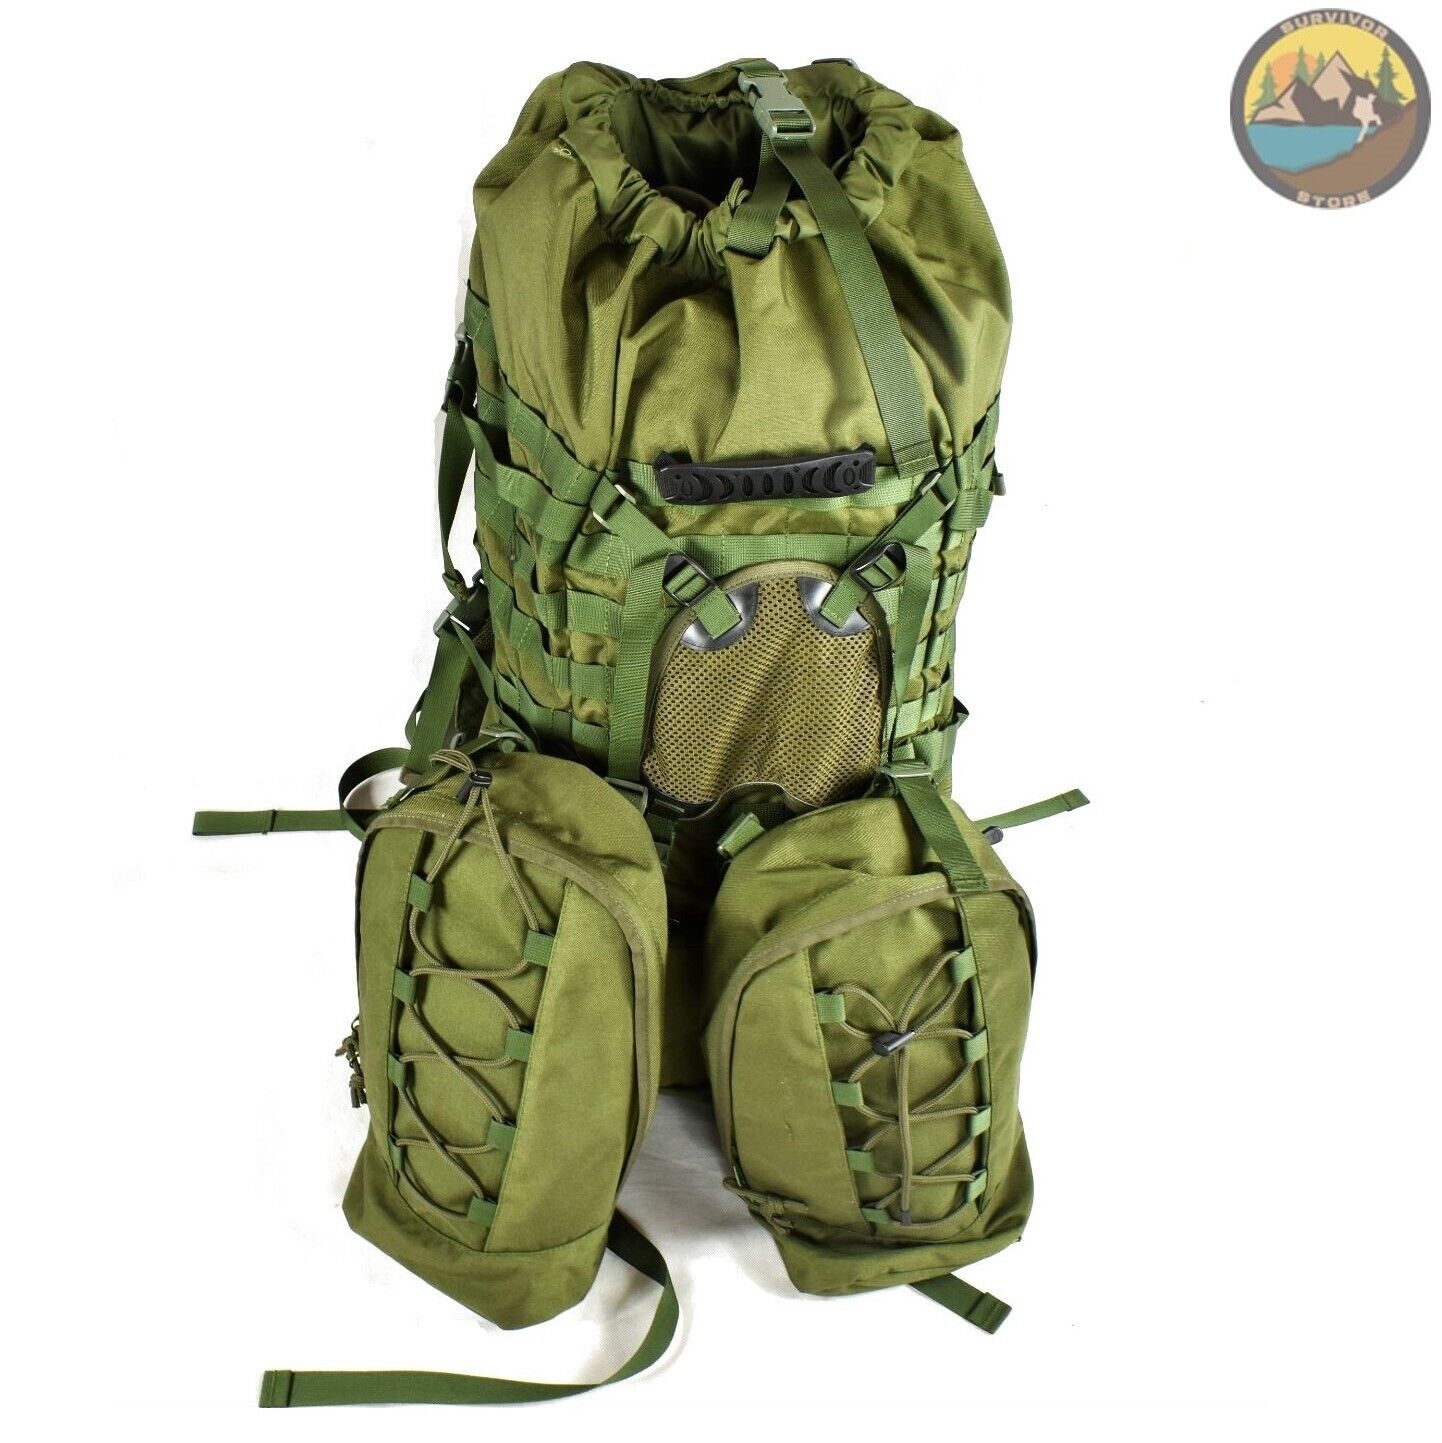 Special Forces Army Tactical Backpack Military Rucksack Green 80-100L NEW